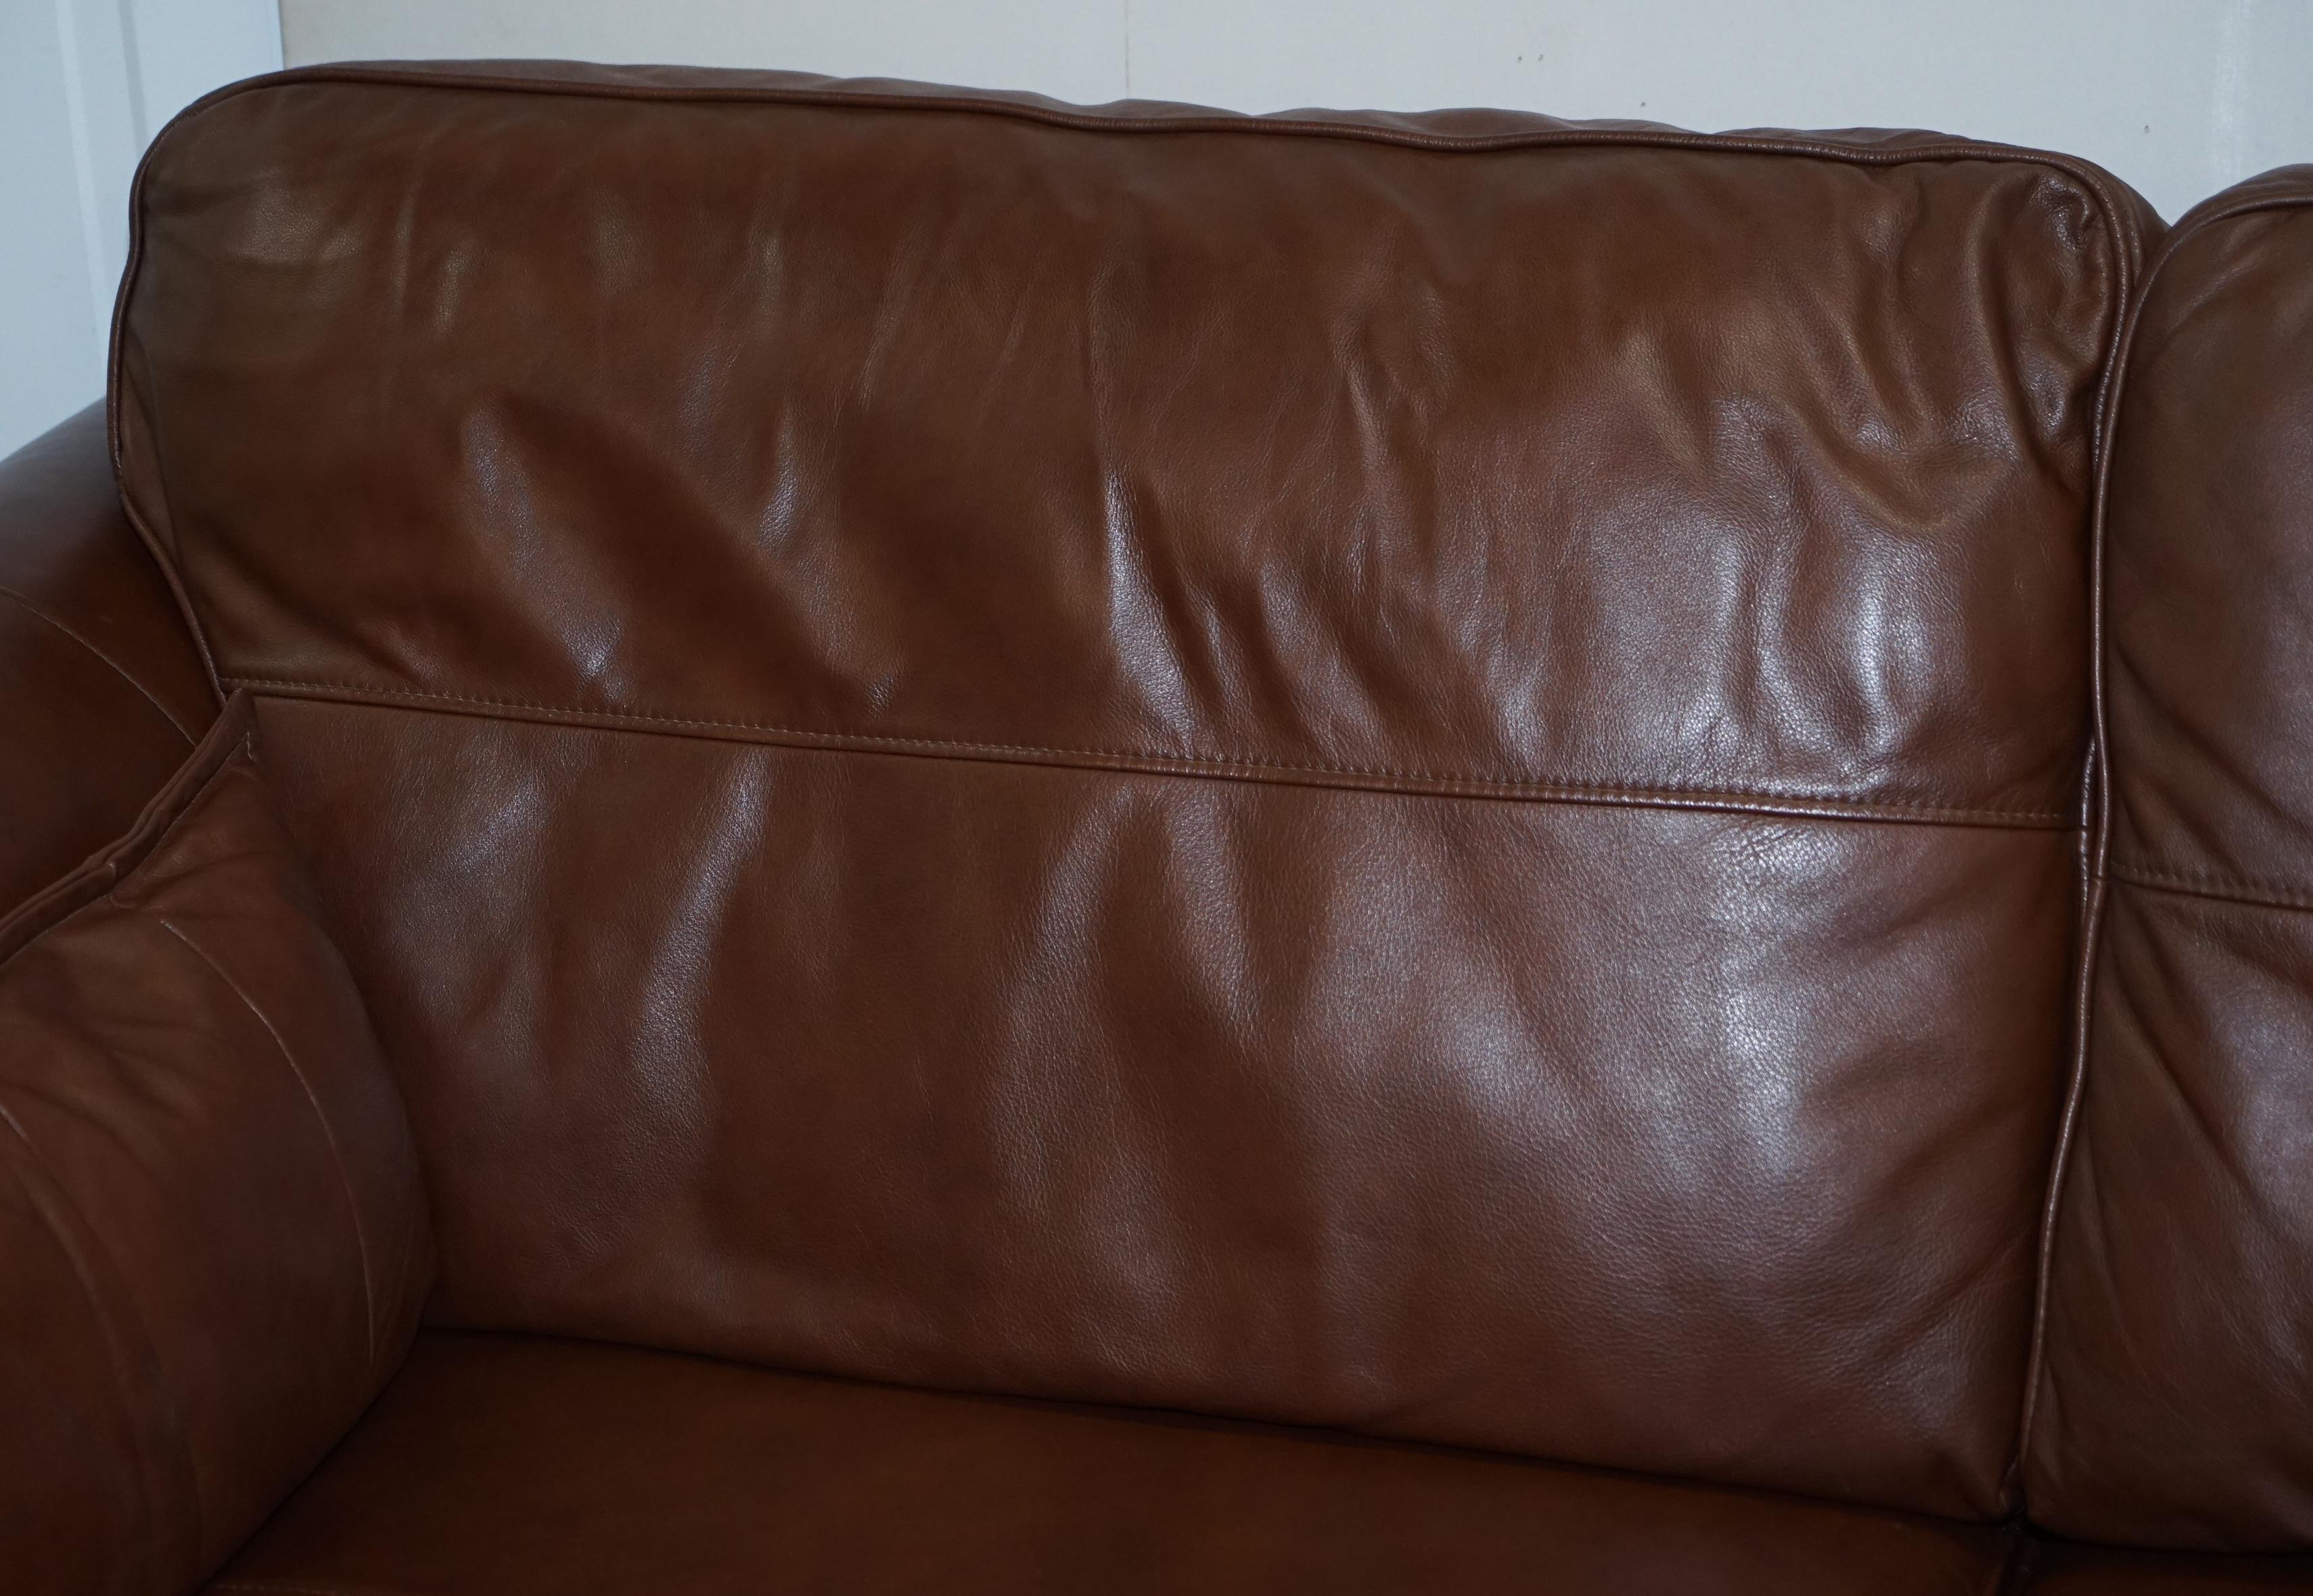 Hand-Crafted Contemporary Brown Leather Large Comfortable Three Seat Sofa Part of Large Suite